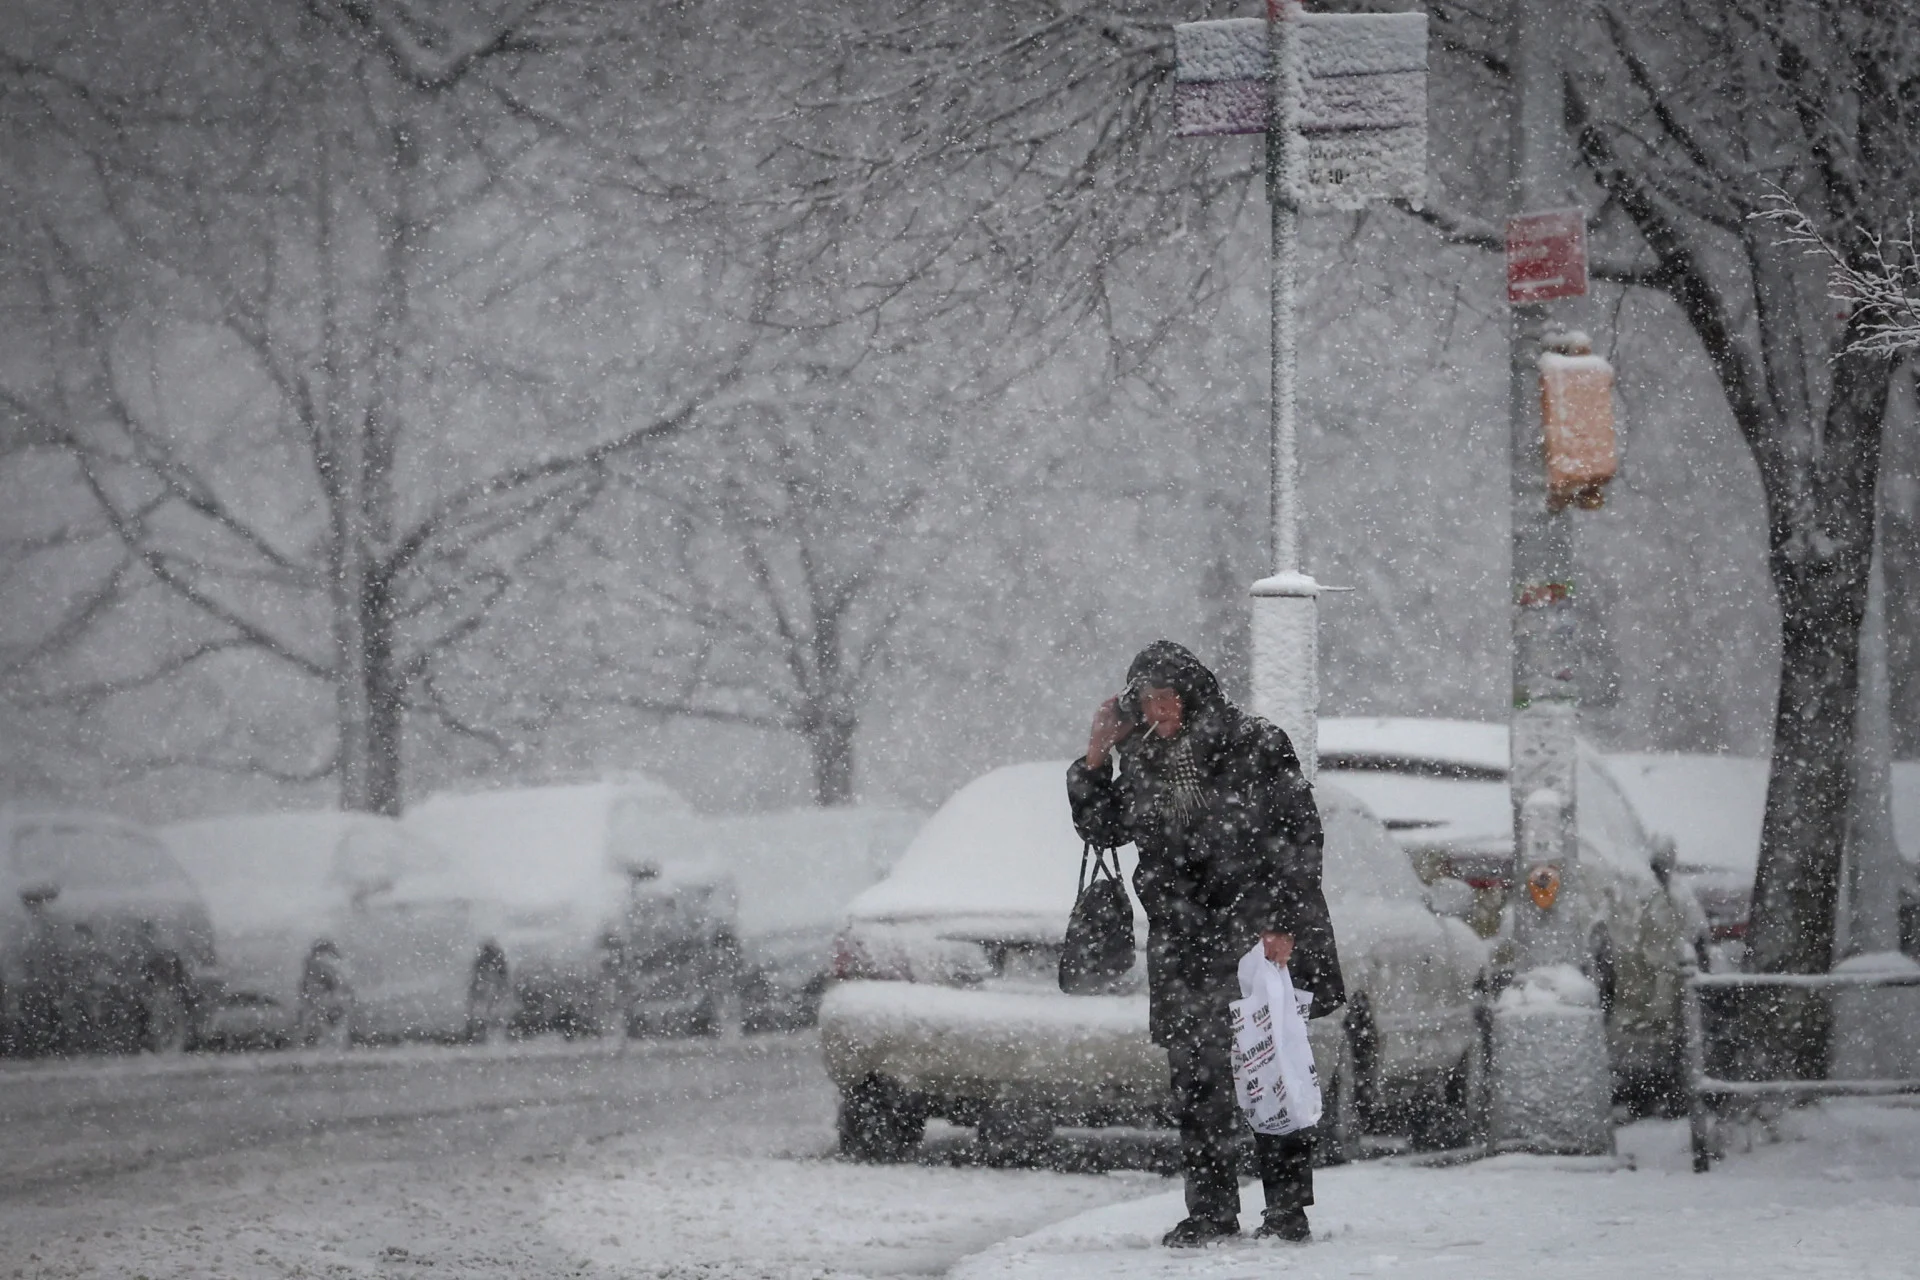 REUTERS: A woman waits at a bus stop during heavy snowfall during winter weather in Manhattan in New York City, U.S., February 13, 2024. REUTERS/Mike Segar